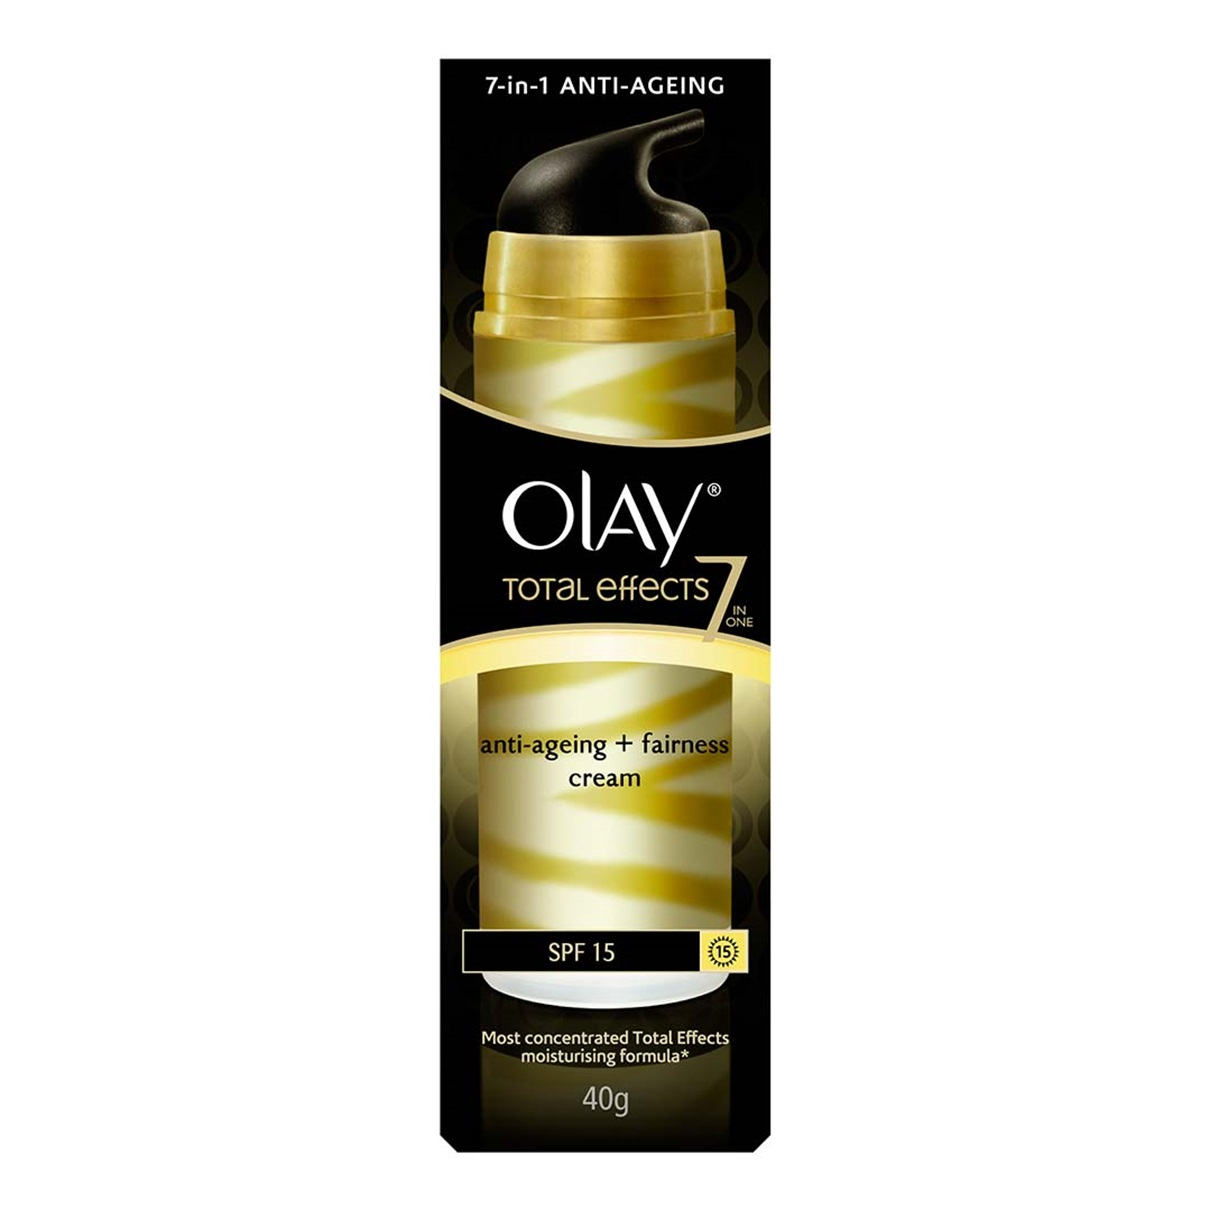 Olay Total Effects 7 in One Anti-ageing